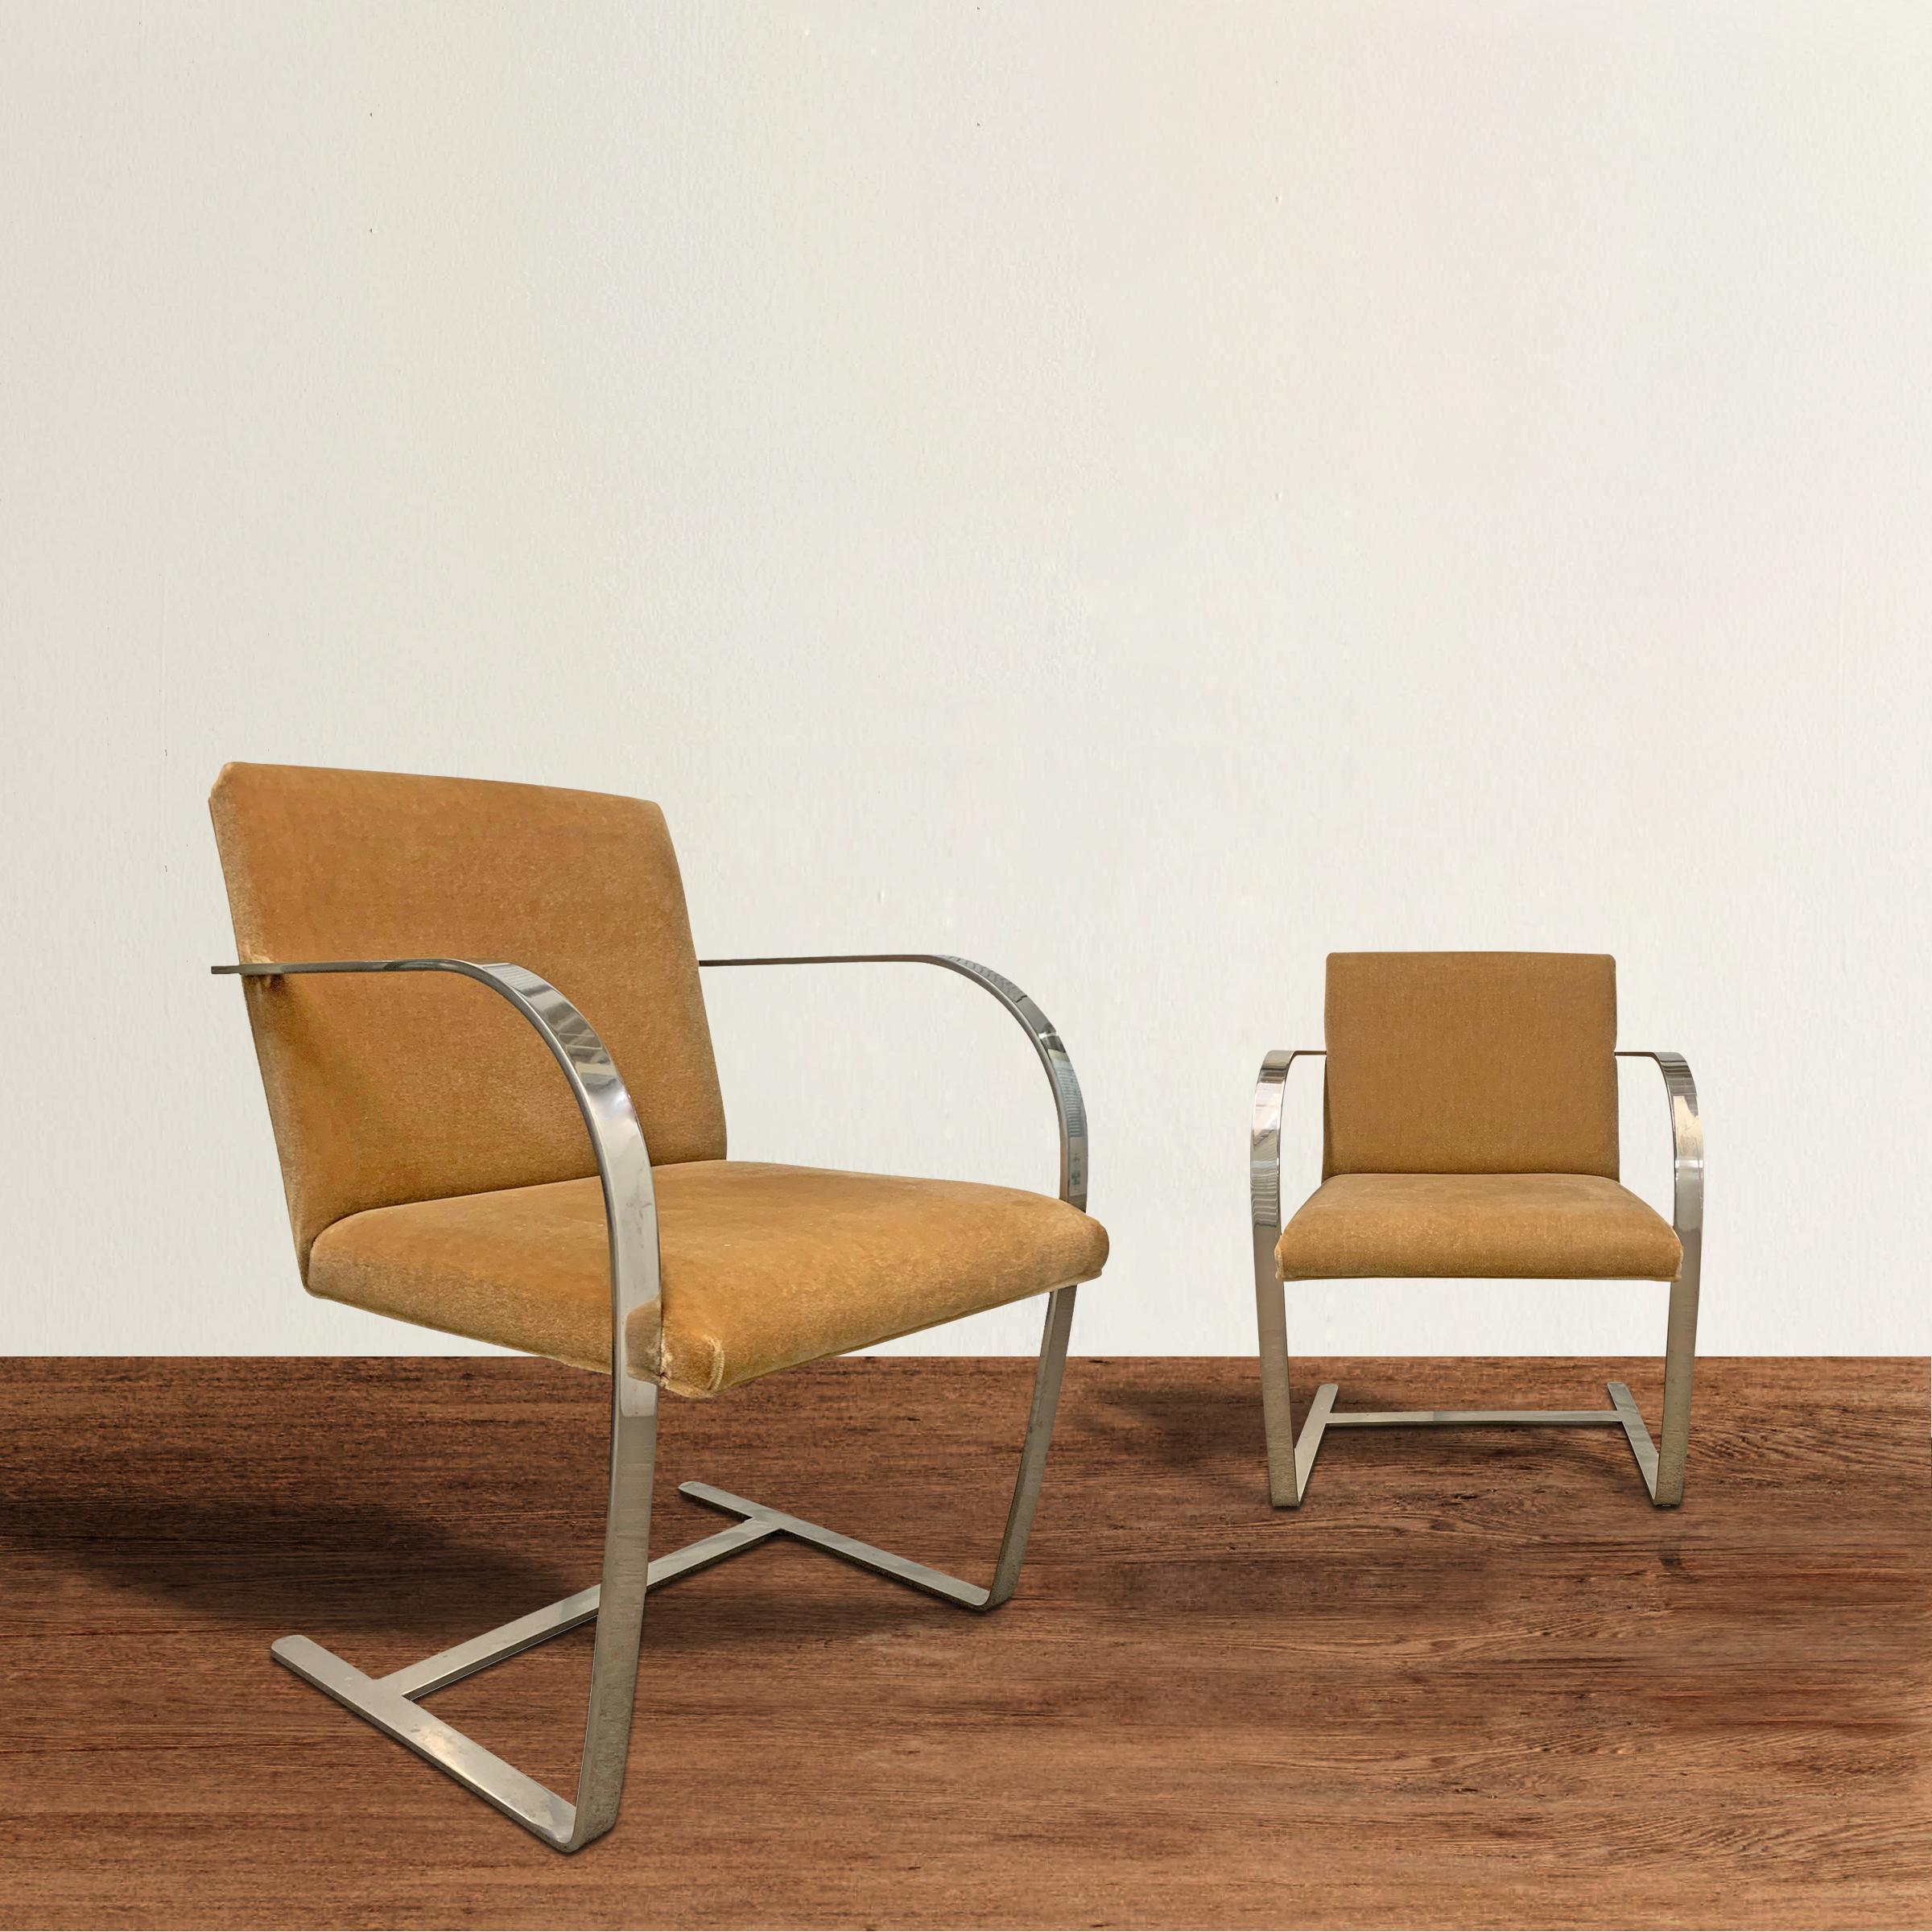 A pair of vintage Brno chairs with polished chrome flatbar steel frames and champagne velvet upholstery. The Brno chair was designed by Ludwig Meis van der Rohe 1930 for the Tugendhat House in Brno, Czech Republic, and remains an icon of 20th